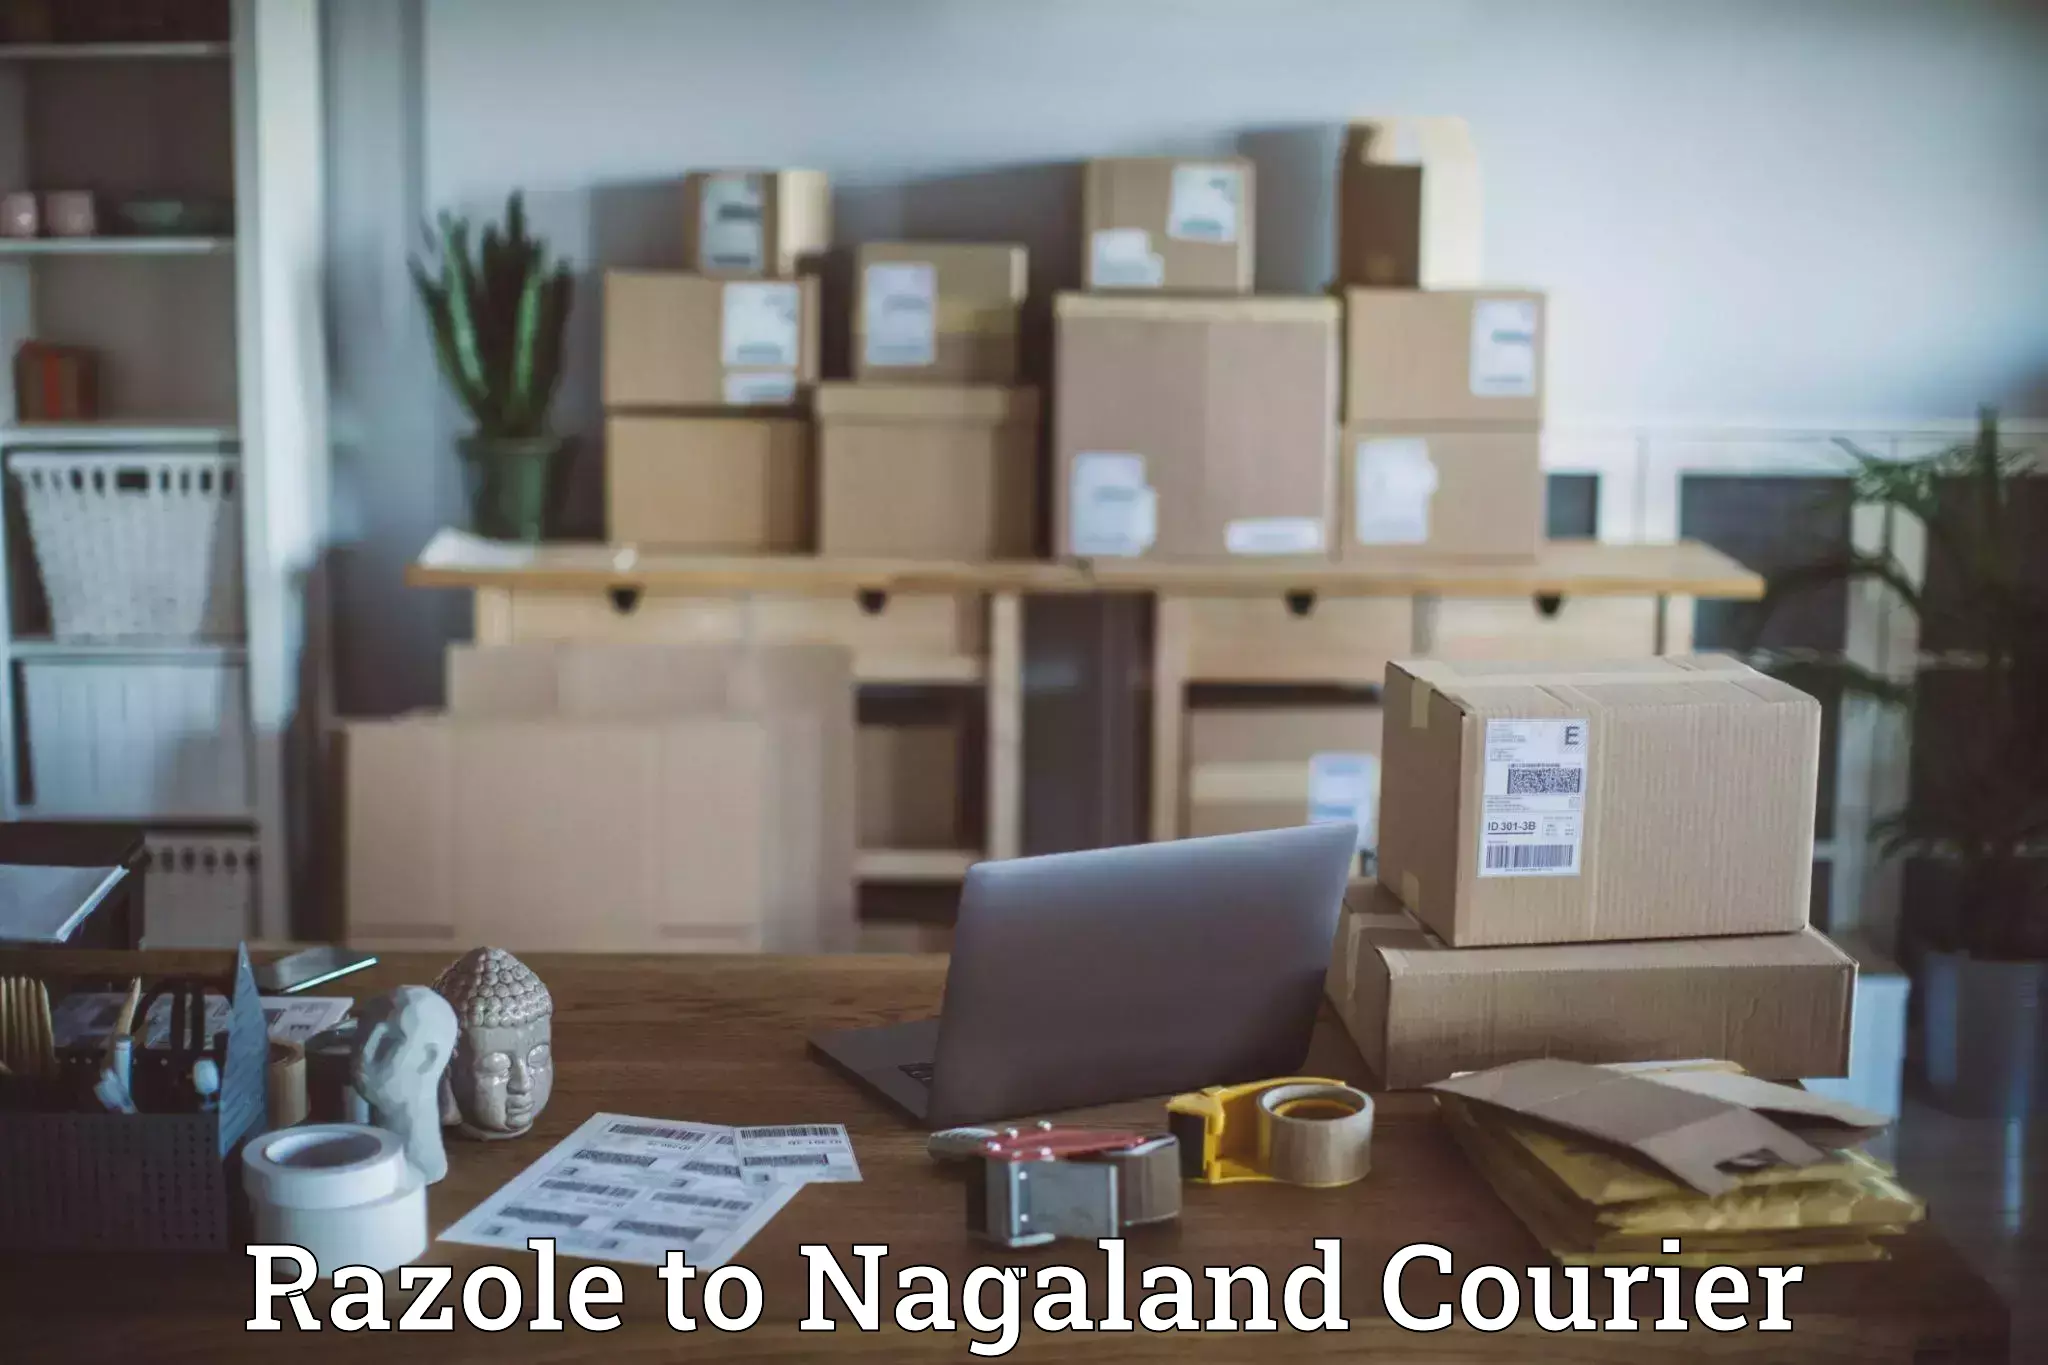 High-priority parcel service Razole to Nagaland